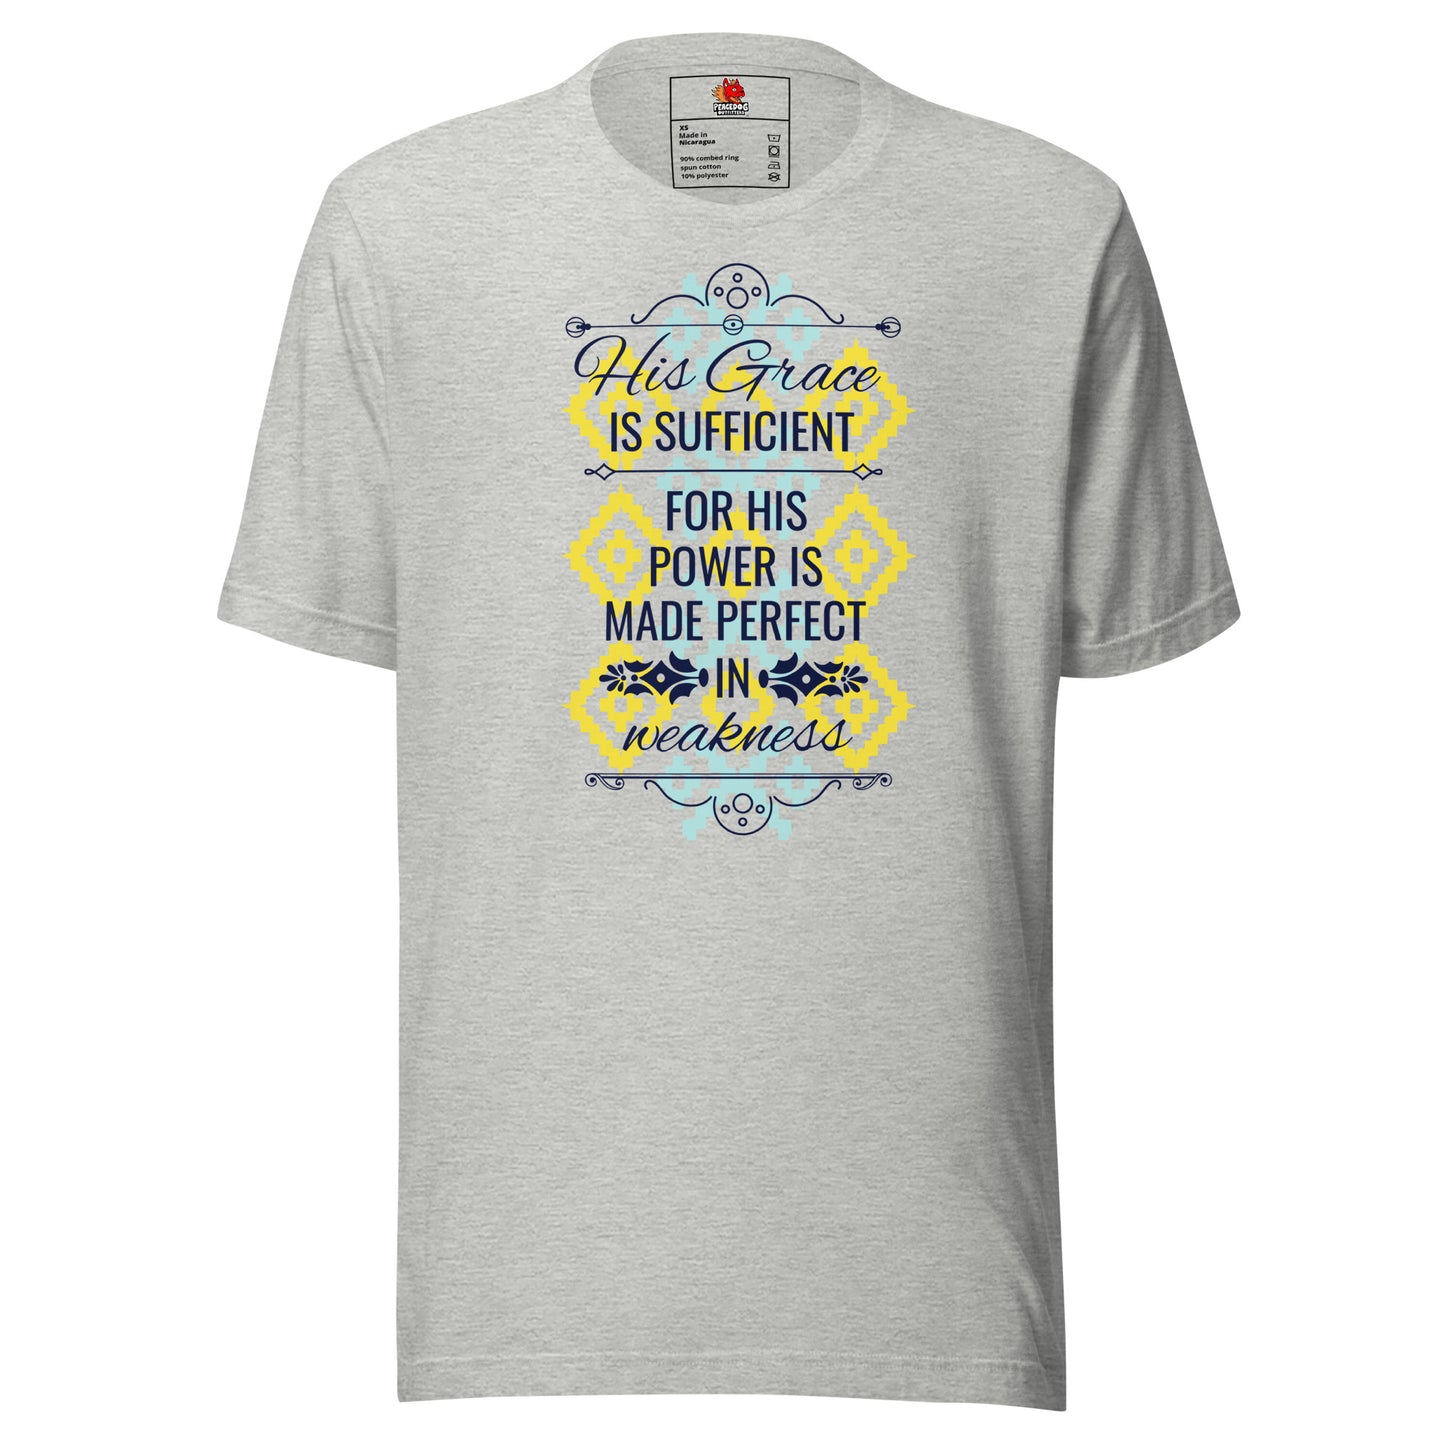 His Grace is sufficient... T-Shirt